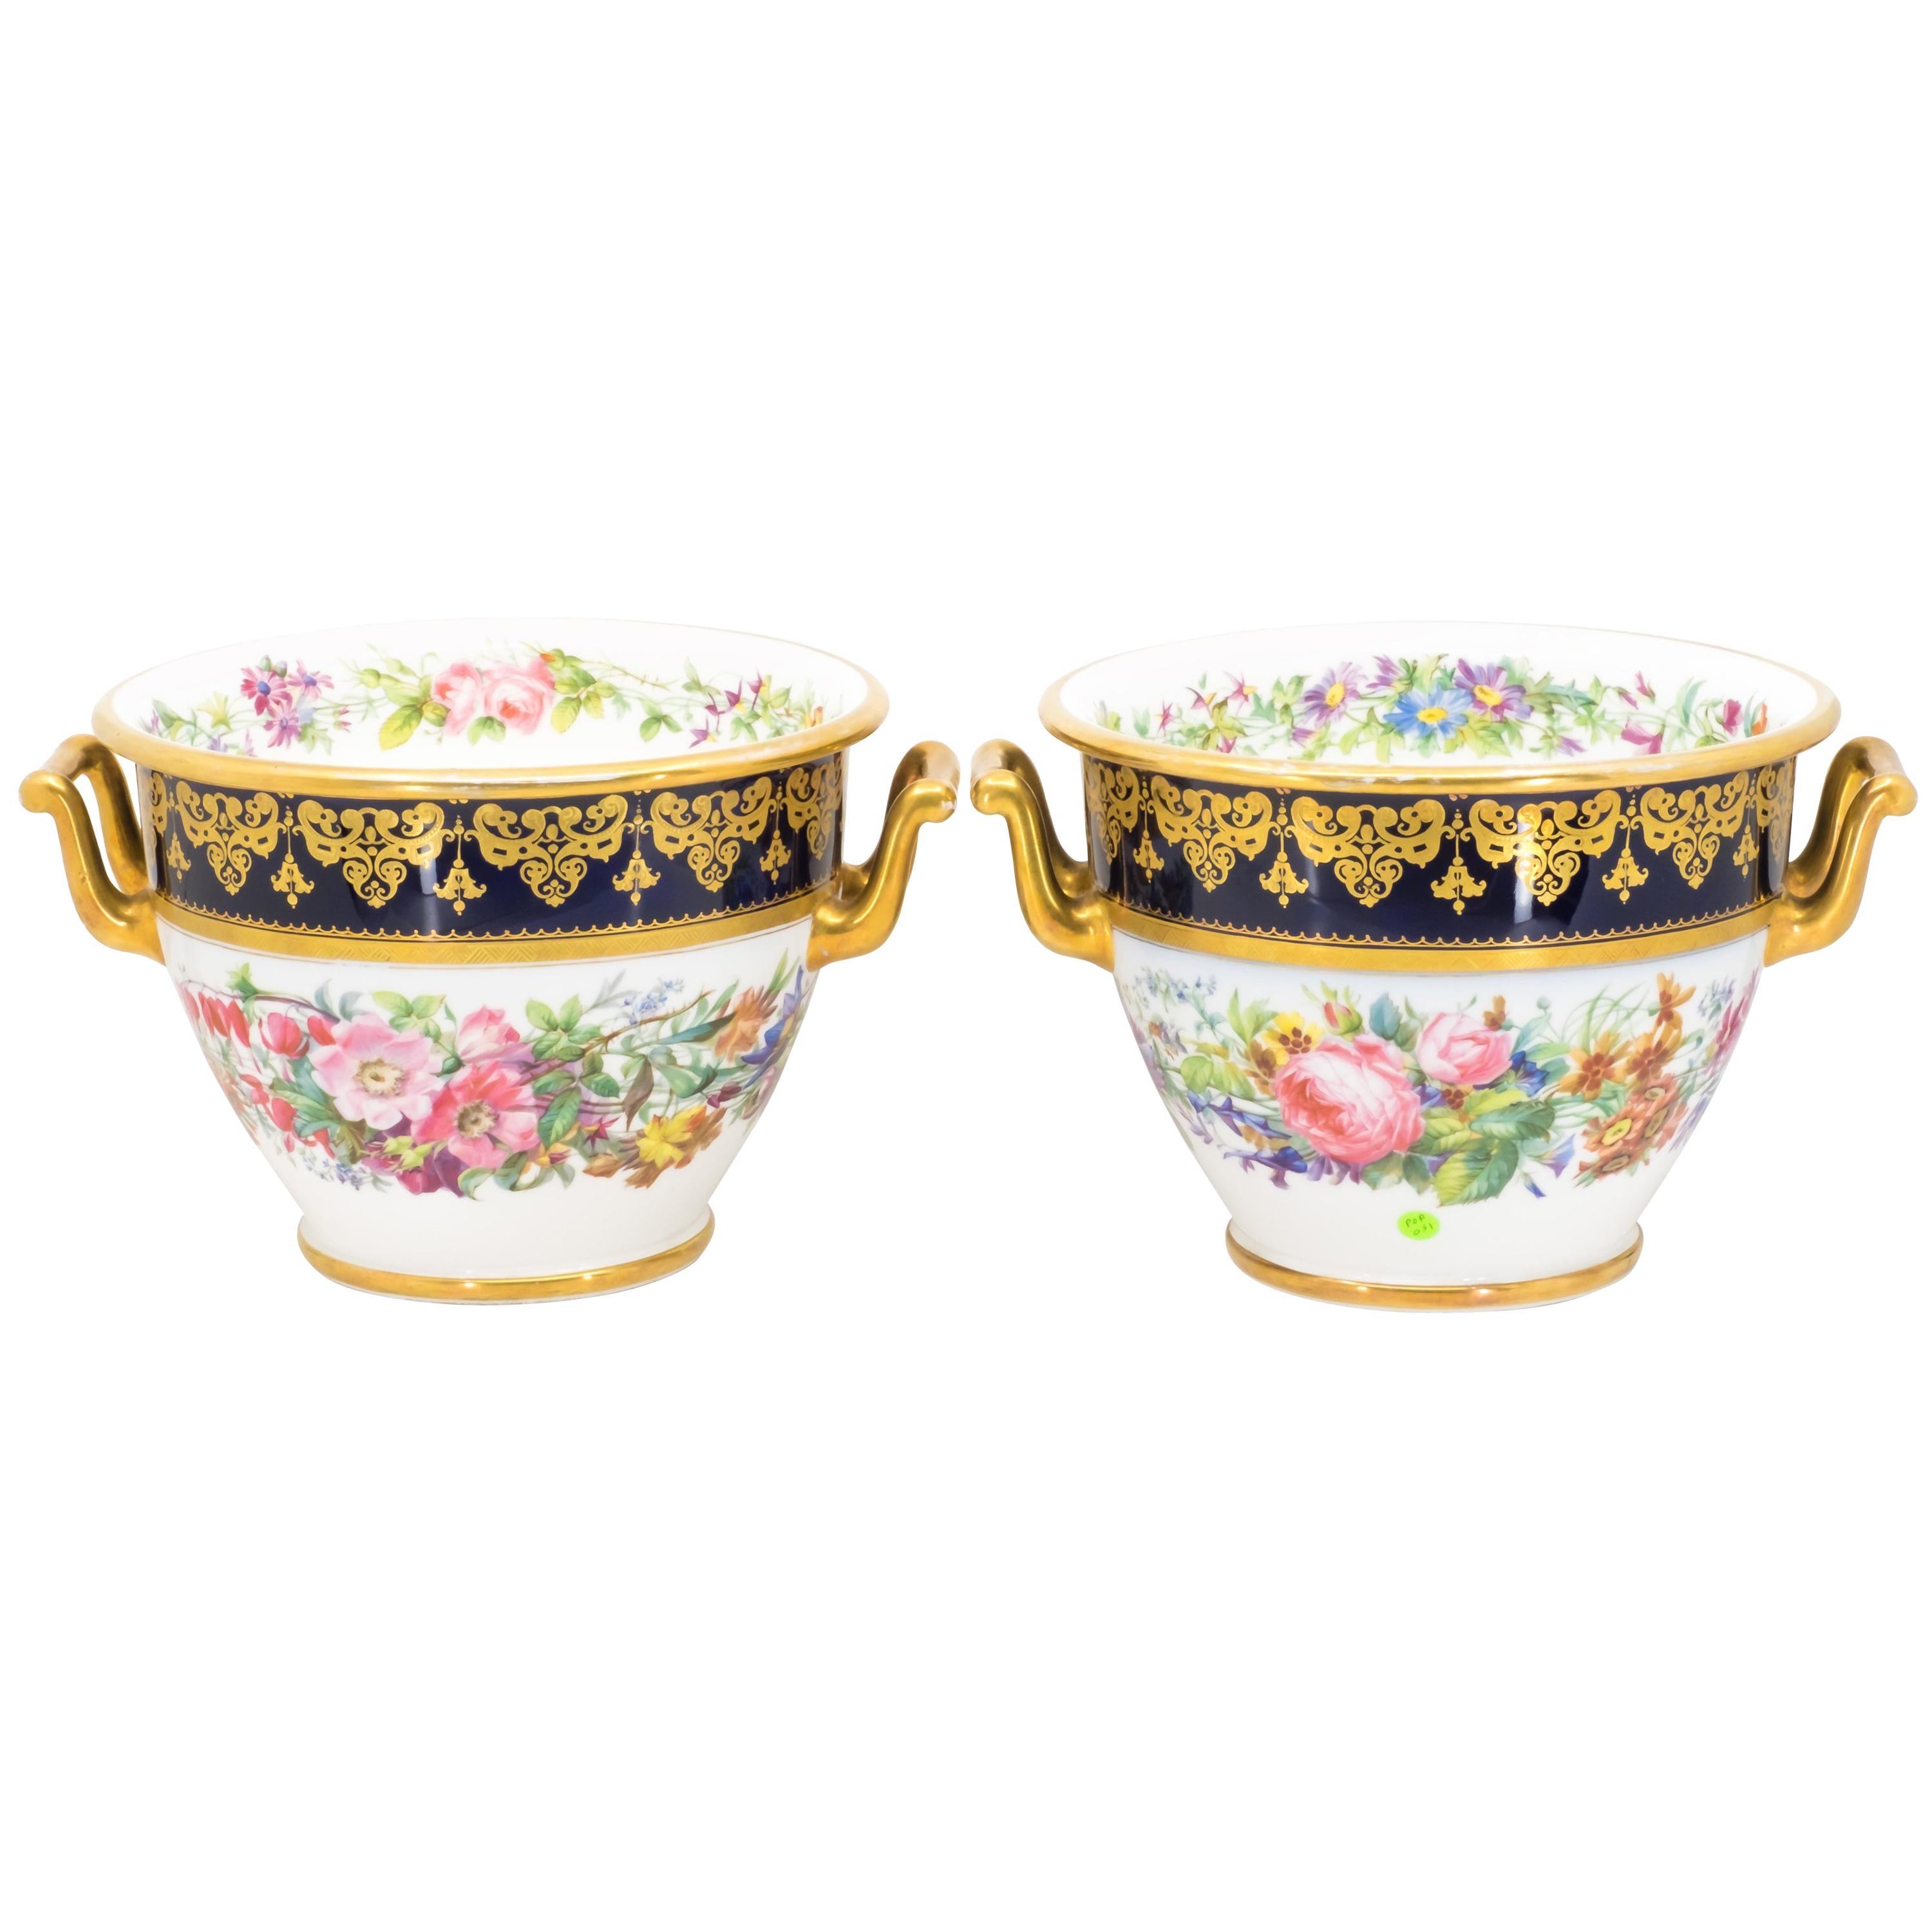 Pair of Porcelain Vases, Hand Painted French 19th Century, Mark for Sevres